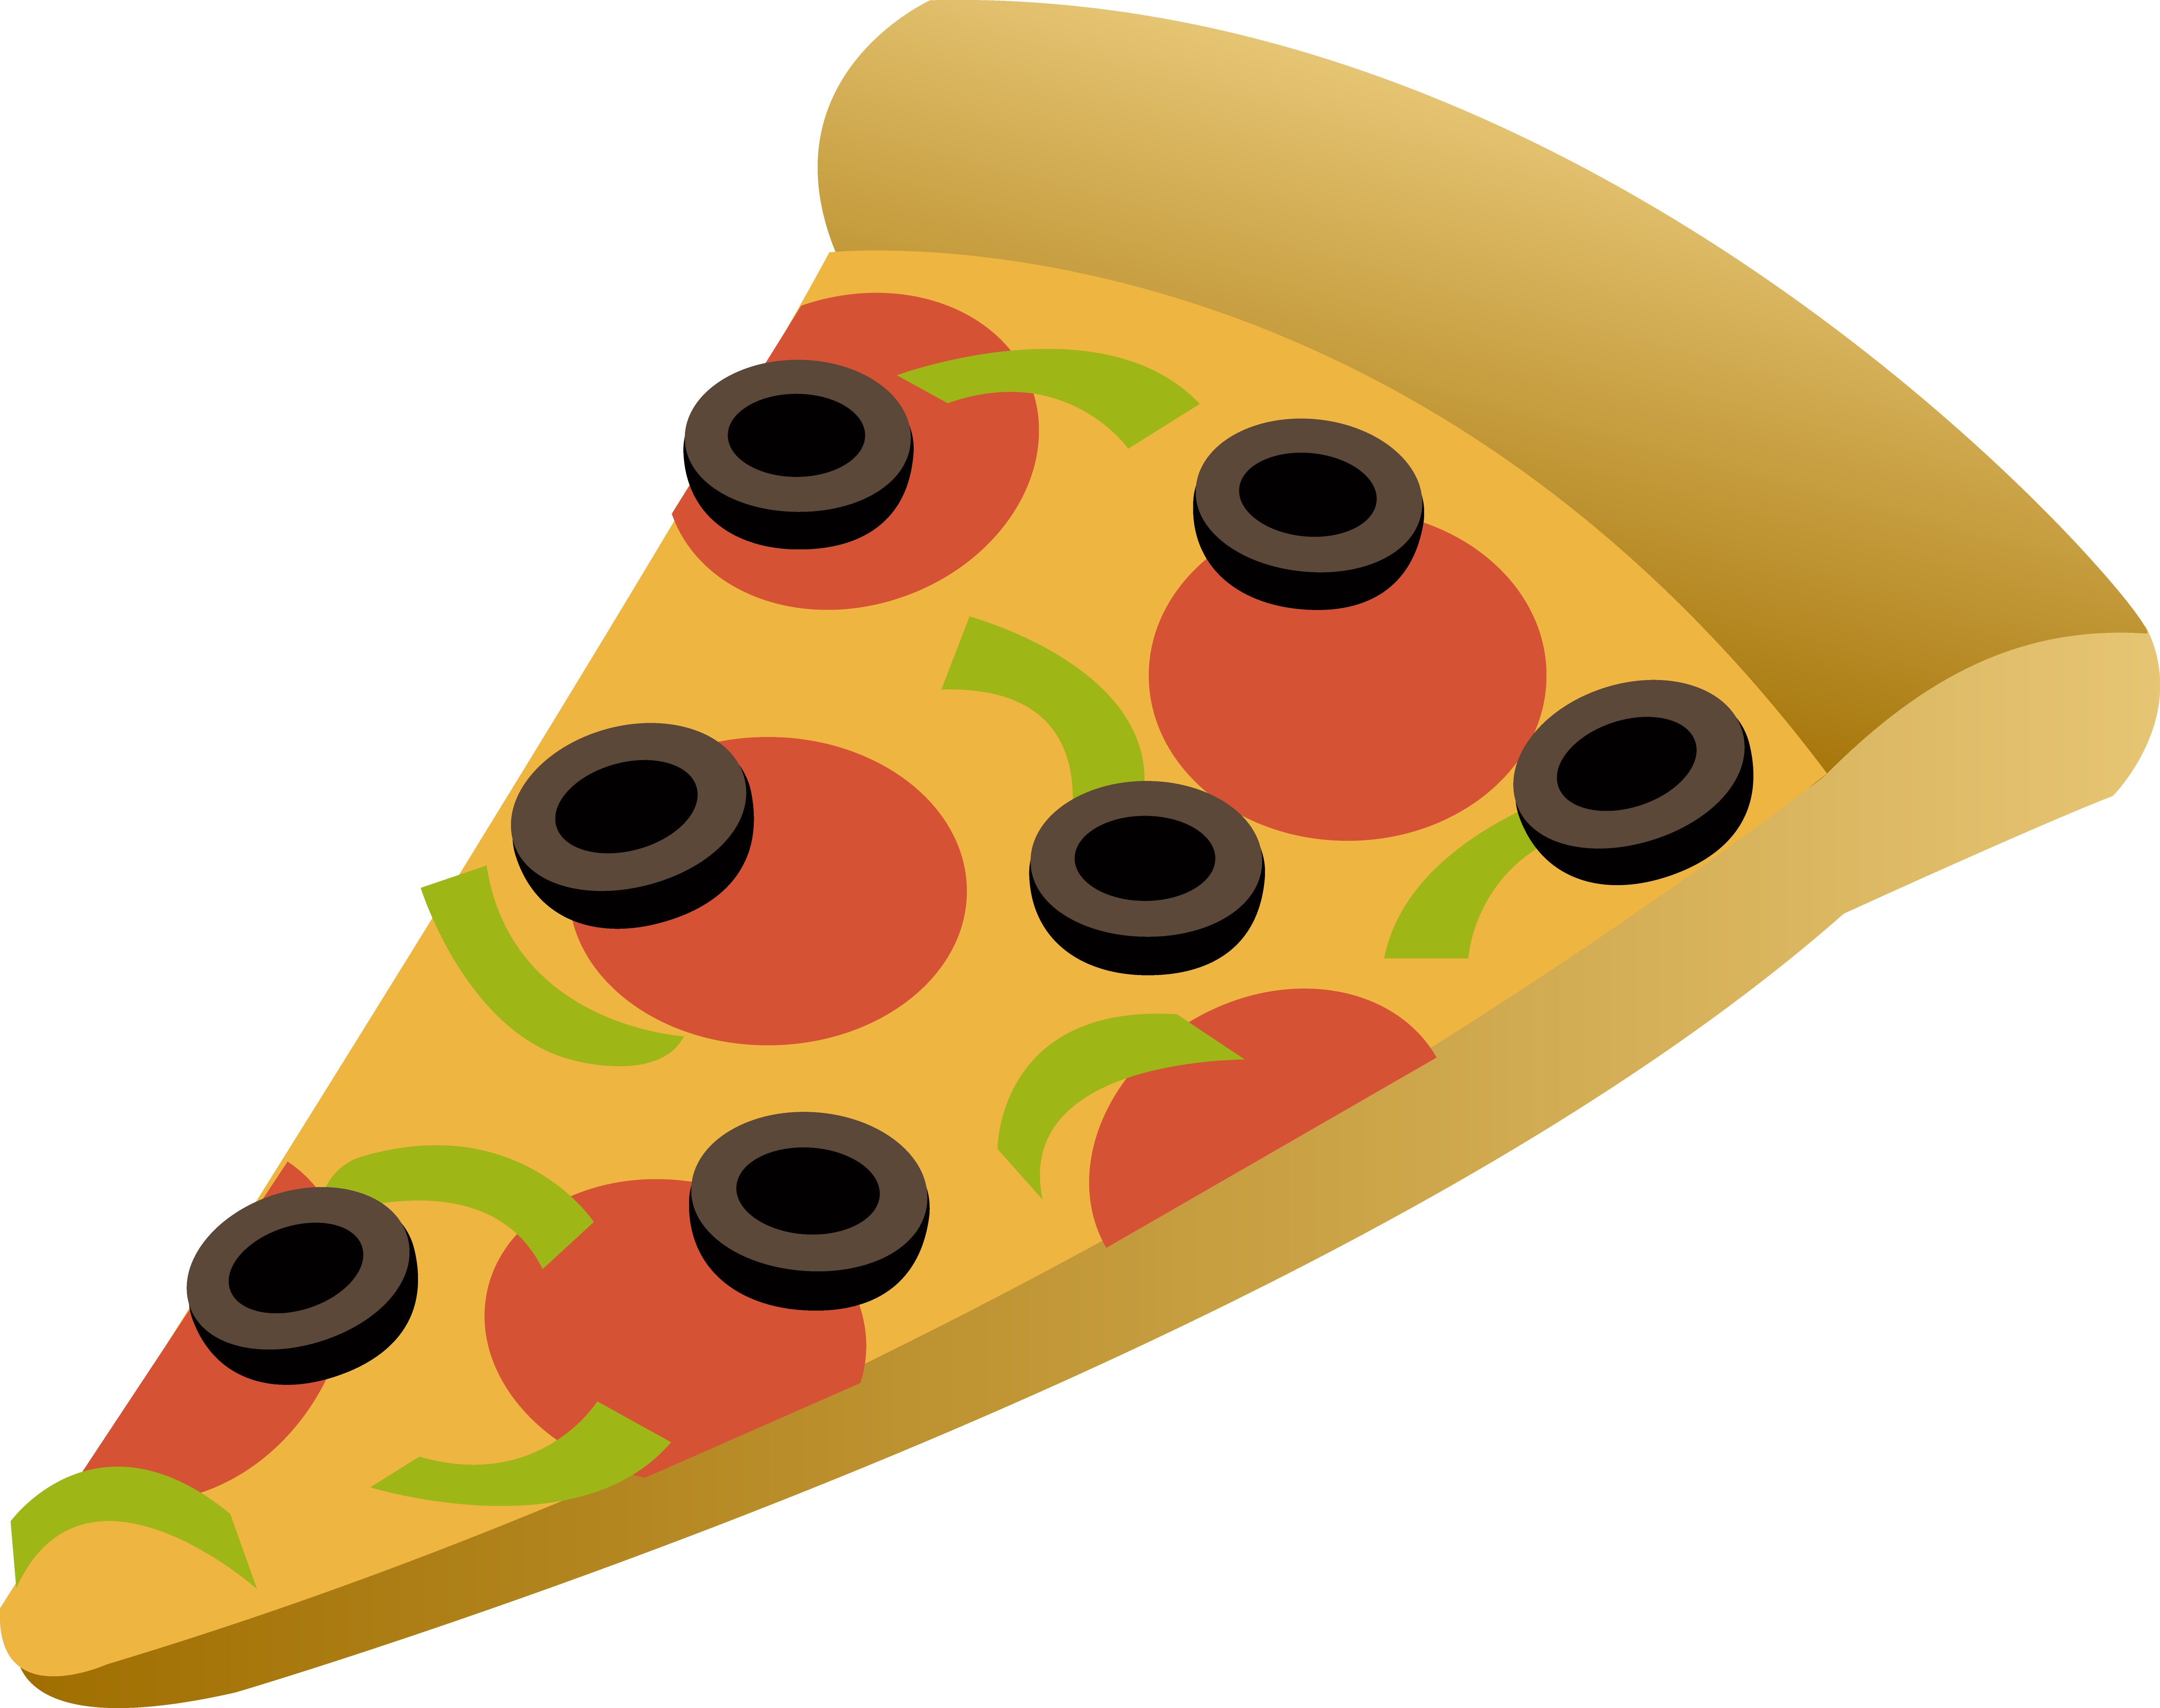 Pepperoni Pizza Slice Clip Art - Free Clipart Images